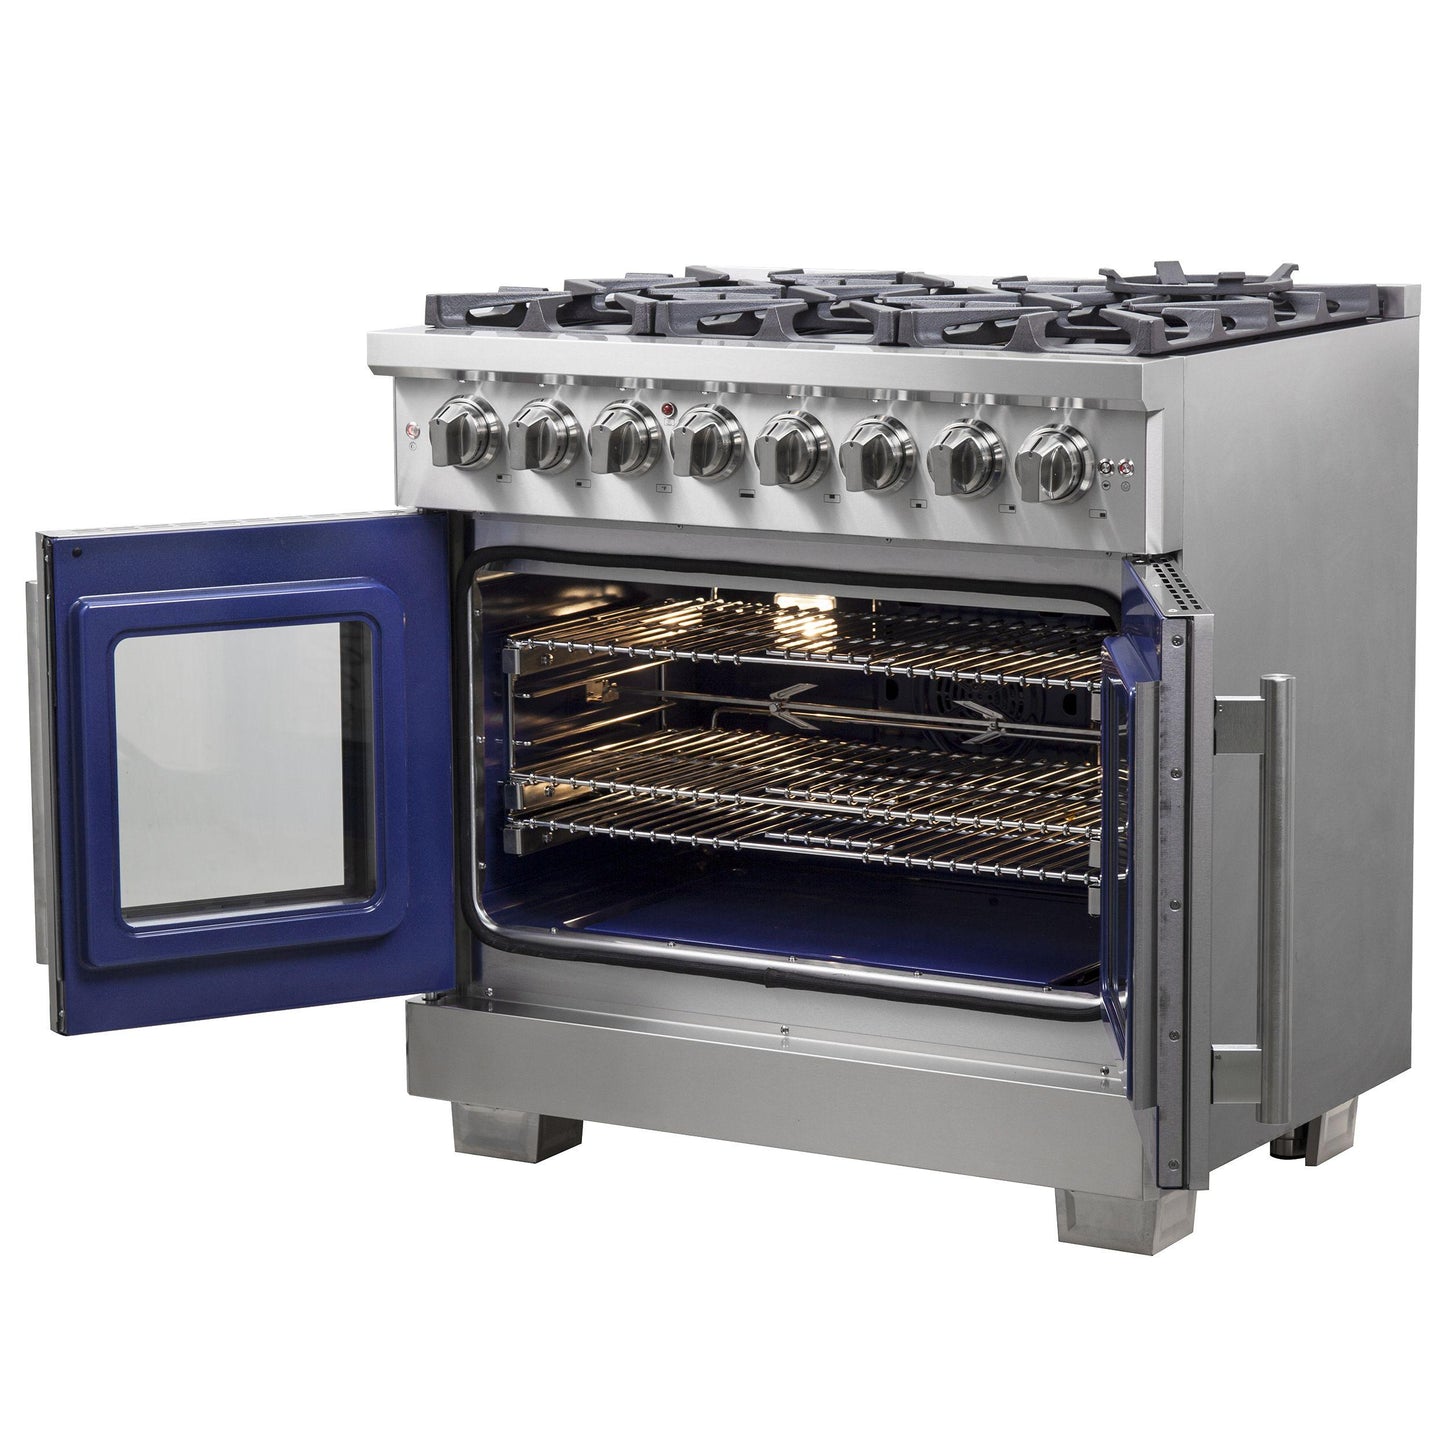 Forno FFSGS638736 Forno Capriasca 36" Freestanding French Door Dual Fuel Range